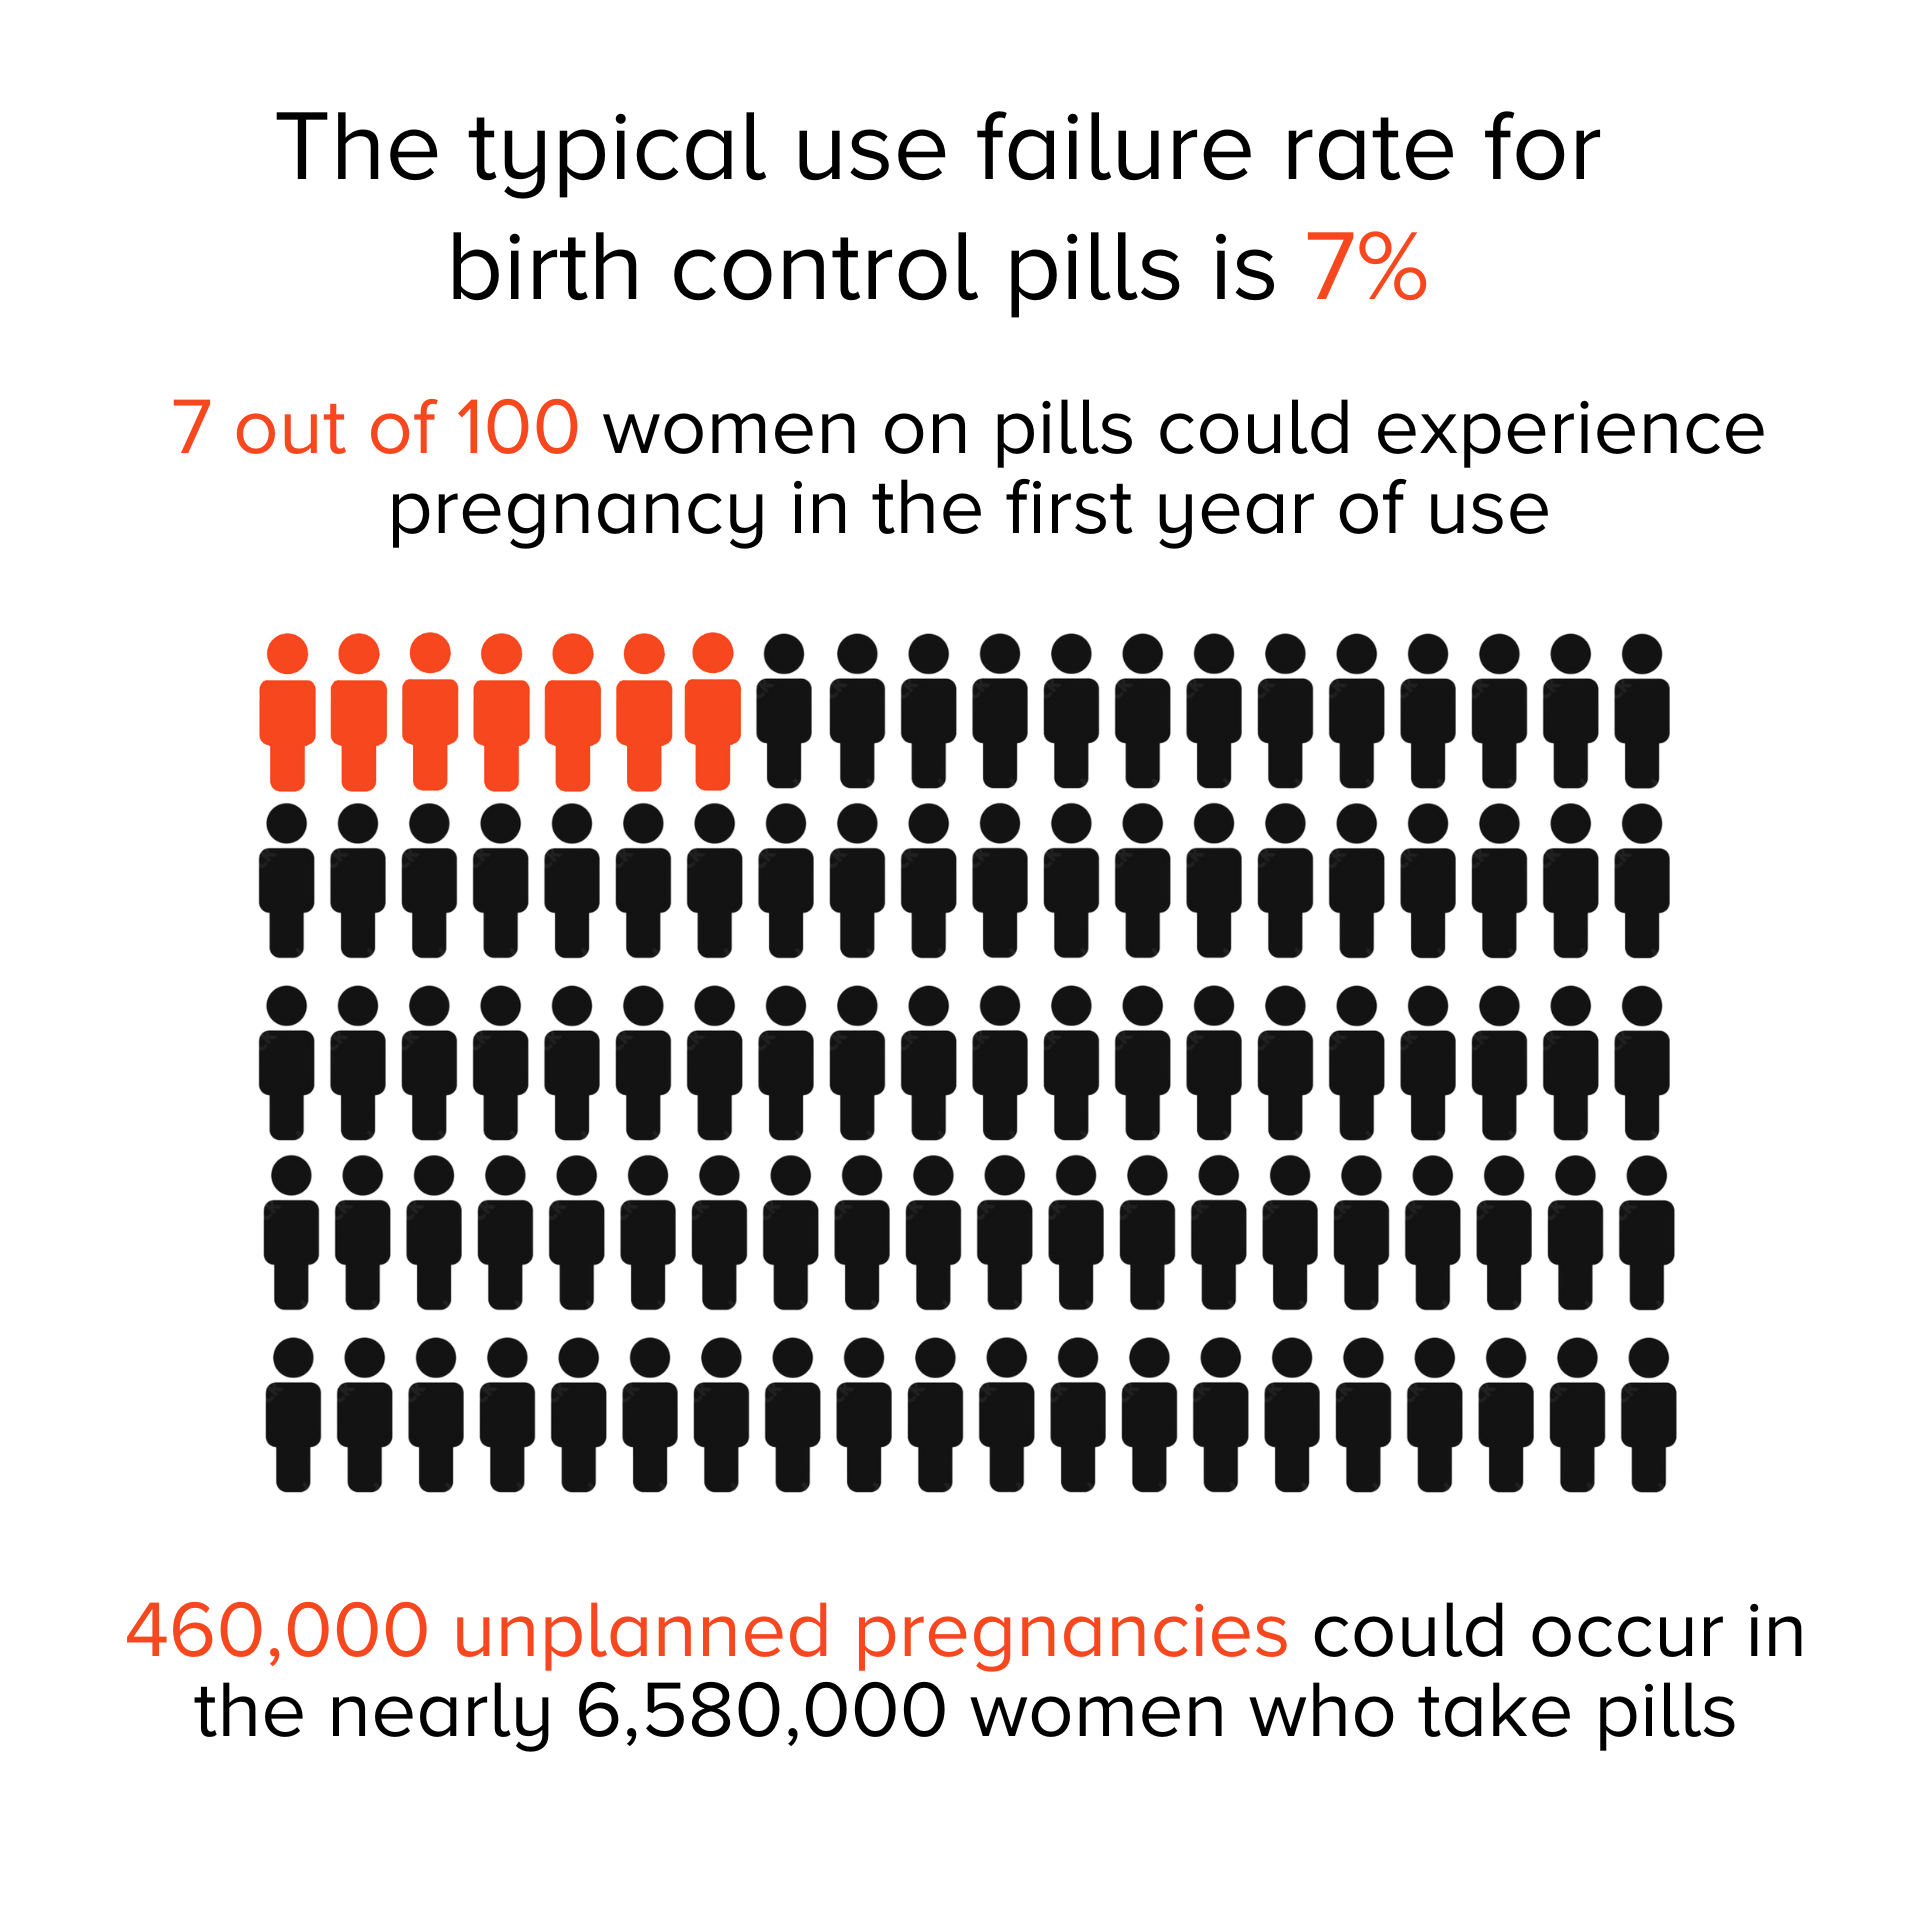 A chart is titled, "The typical use failure rate for birth control pills in 7%". A subtitle reads, "7 out of 100 women on pills could experience pregnancy in the first year of use." Below the text are 100 stick figures, 7 of which are highlighted in orange. Text underneath the figures reads, "460,000 unplanned pregnancies could occur in the nearly 6,580,000 women who take pills."